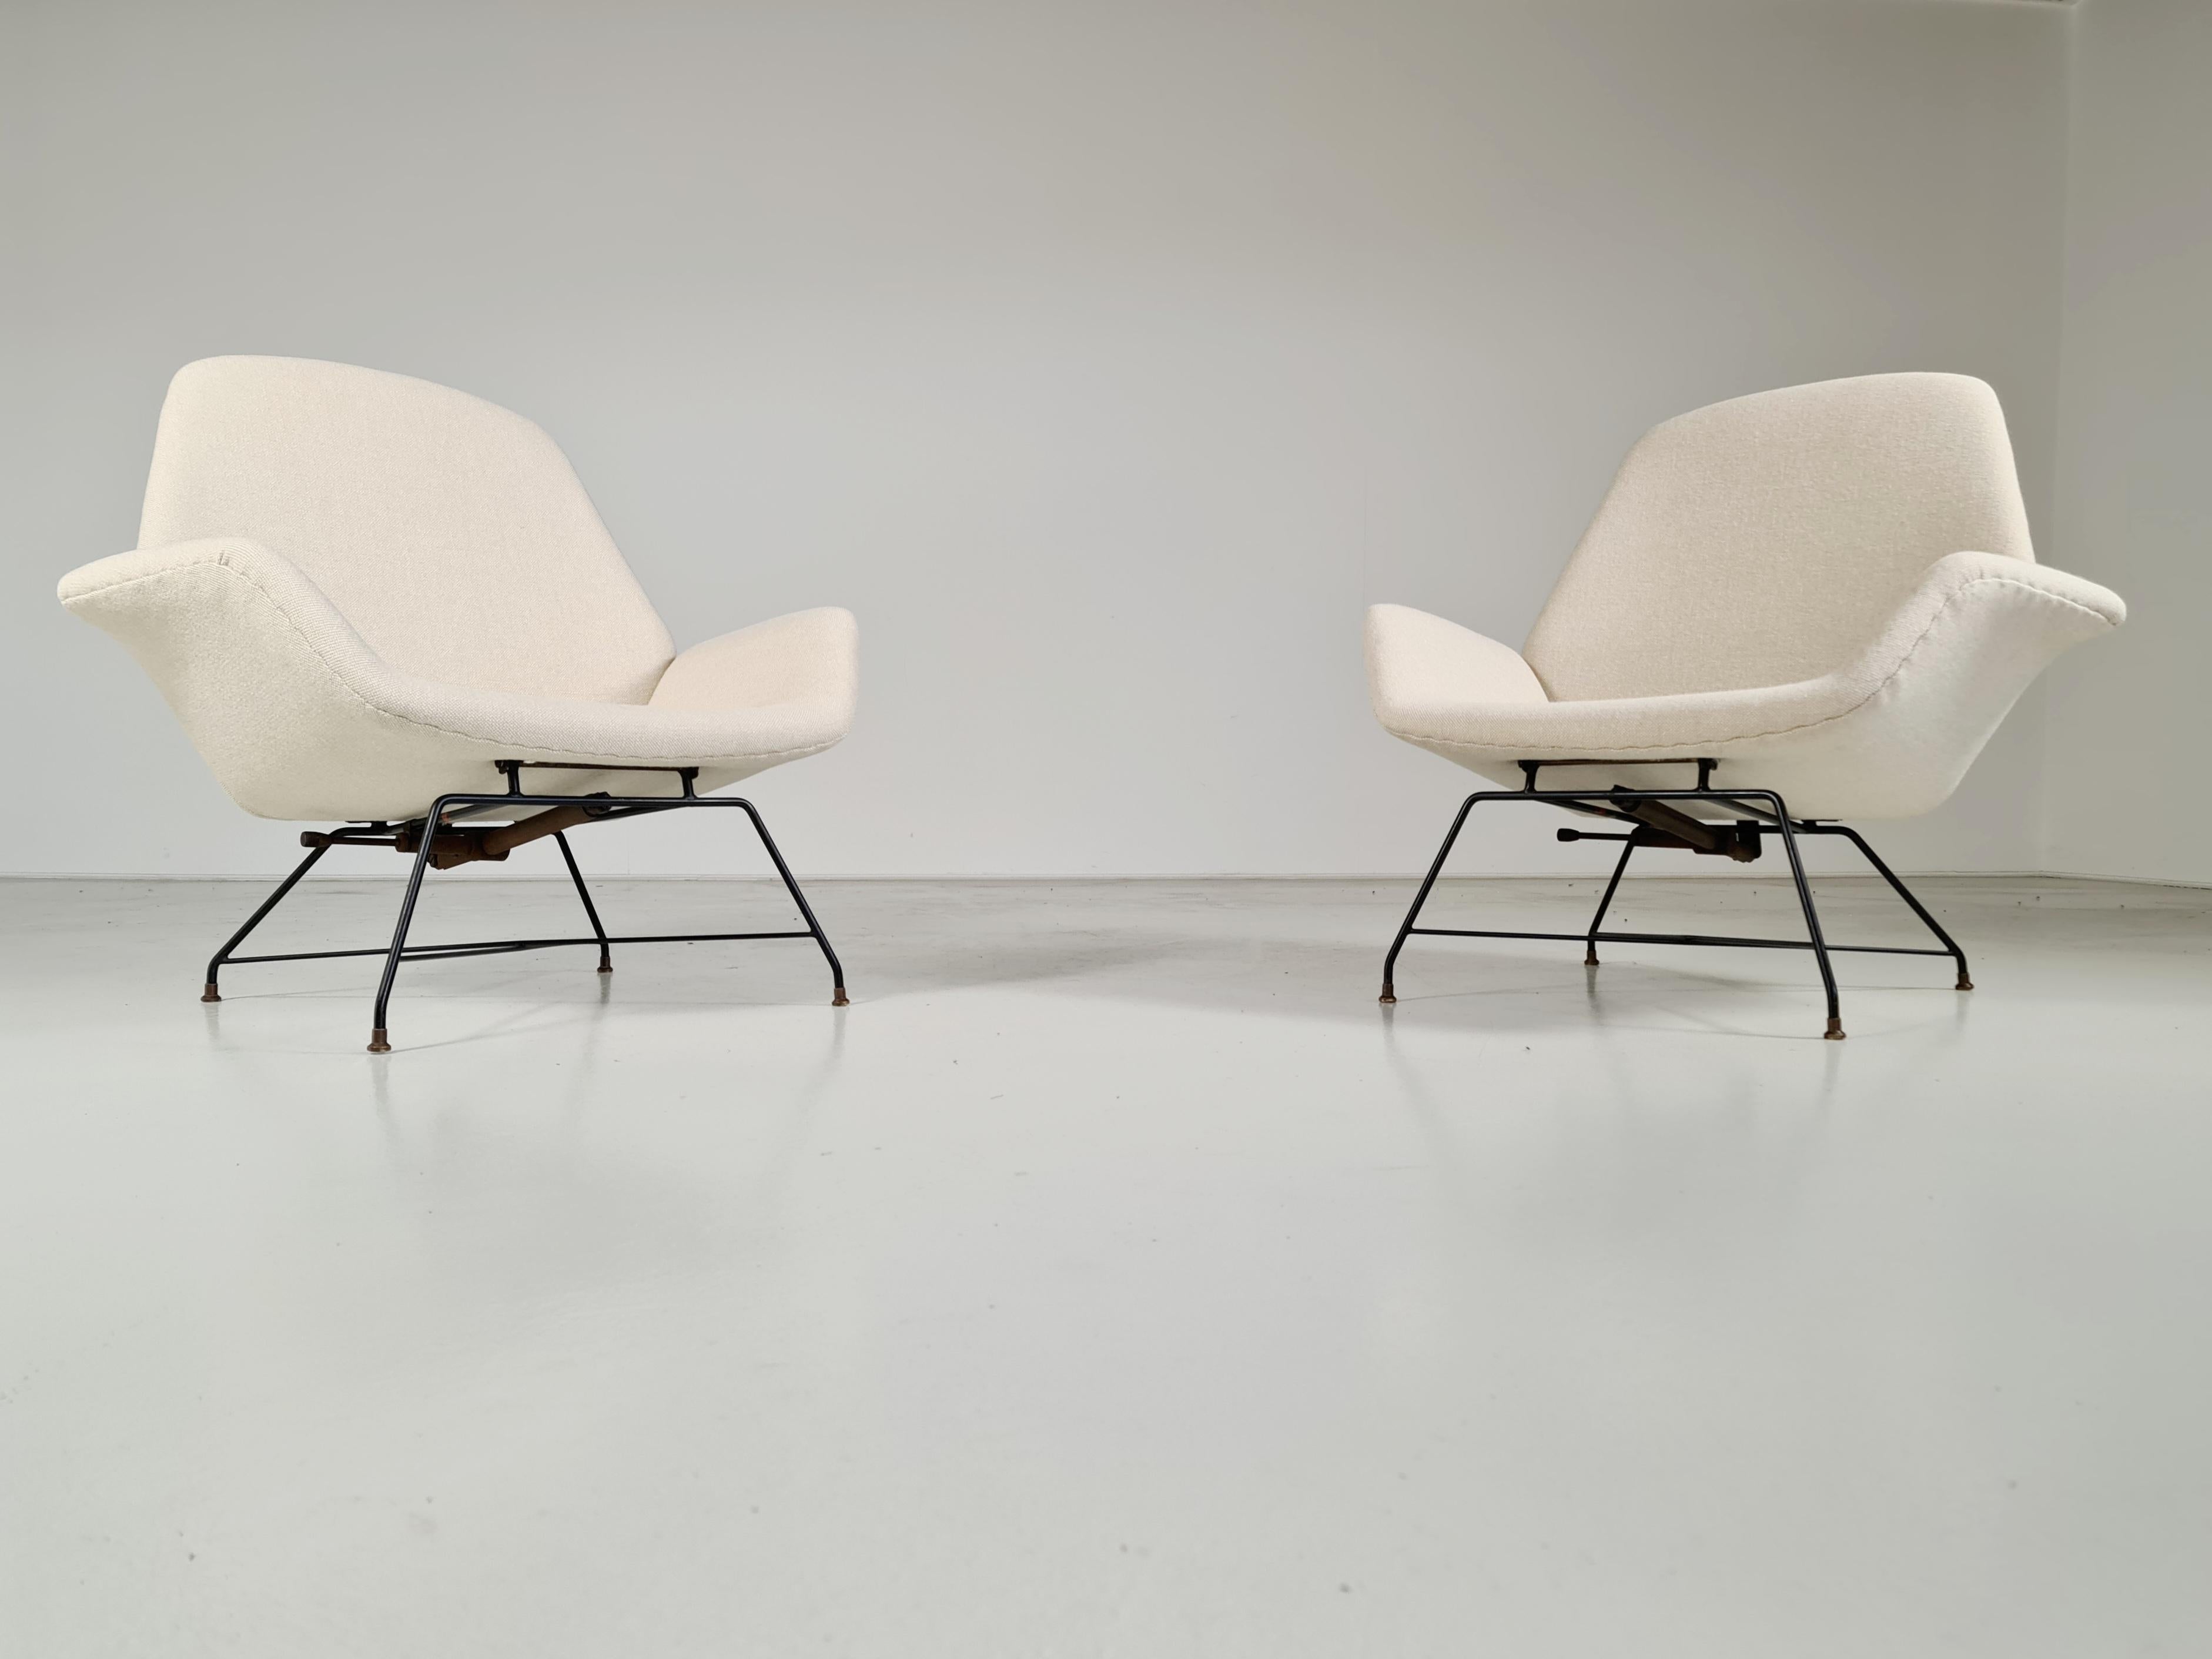 Italian ‘Lotus’ Lounge Chairs in cream wool fabric by Augusto Bozzi for Saporiti, 1960s For Sale